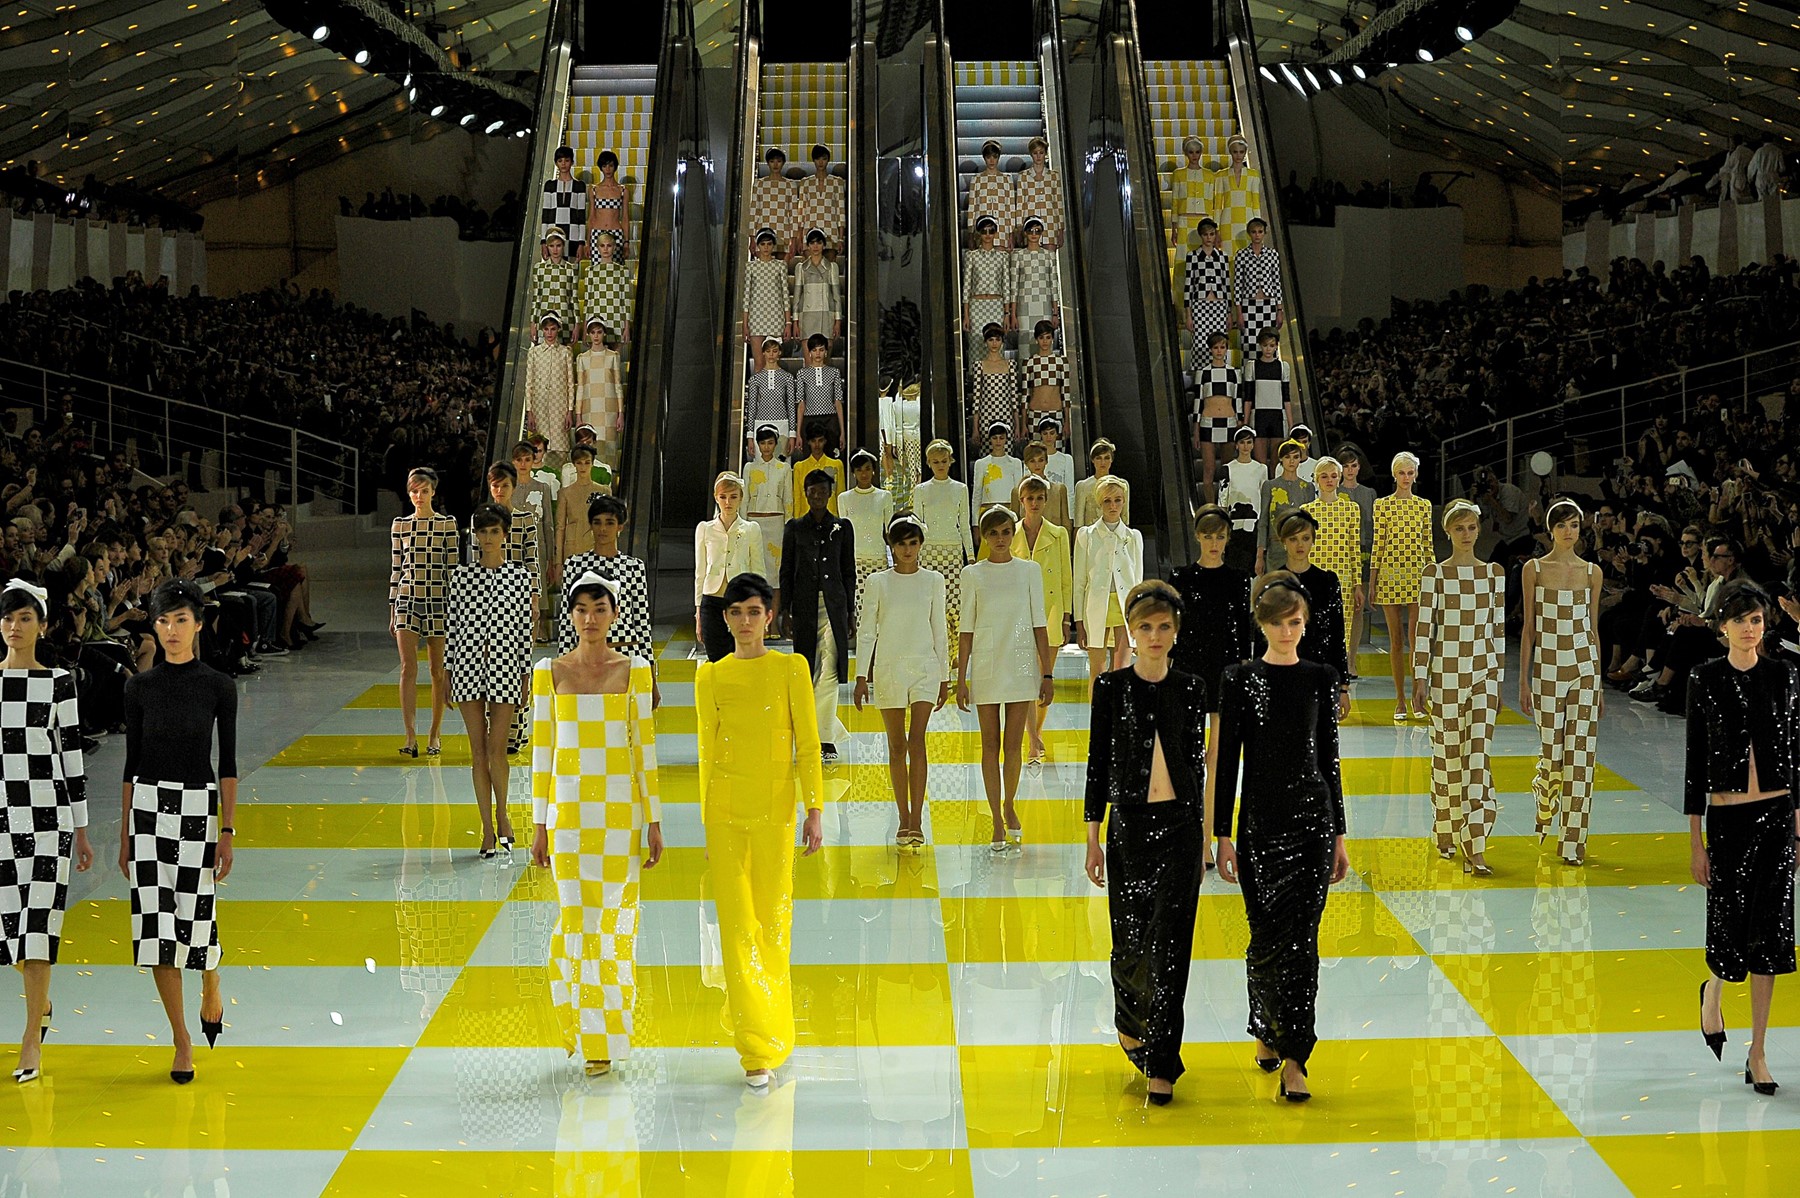 Louis Vuitton's Latest Collection is an Ode to Adolescence - S/ magazine